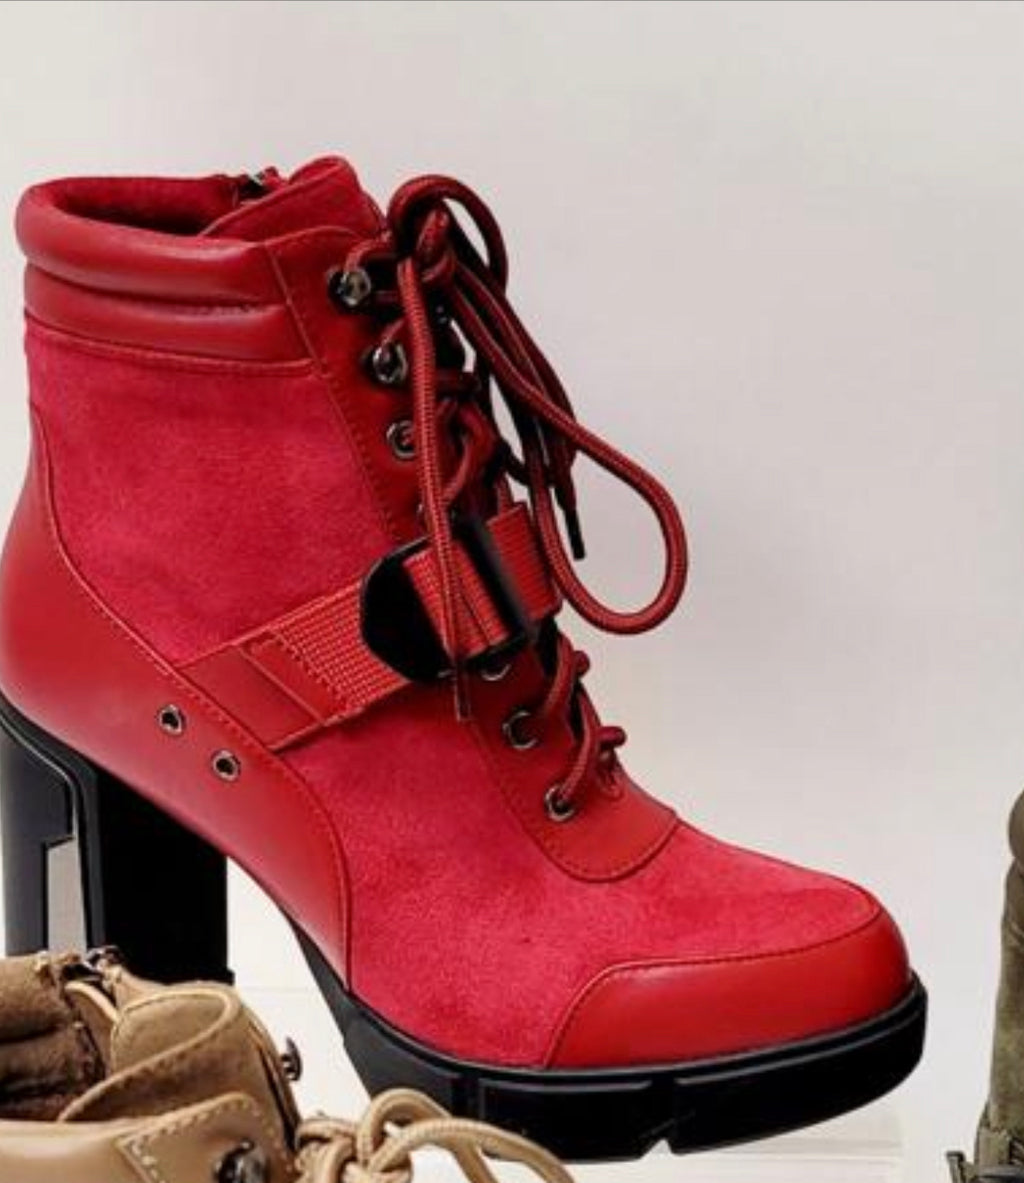 Future Red Bootie